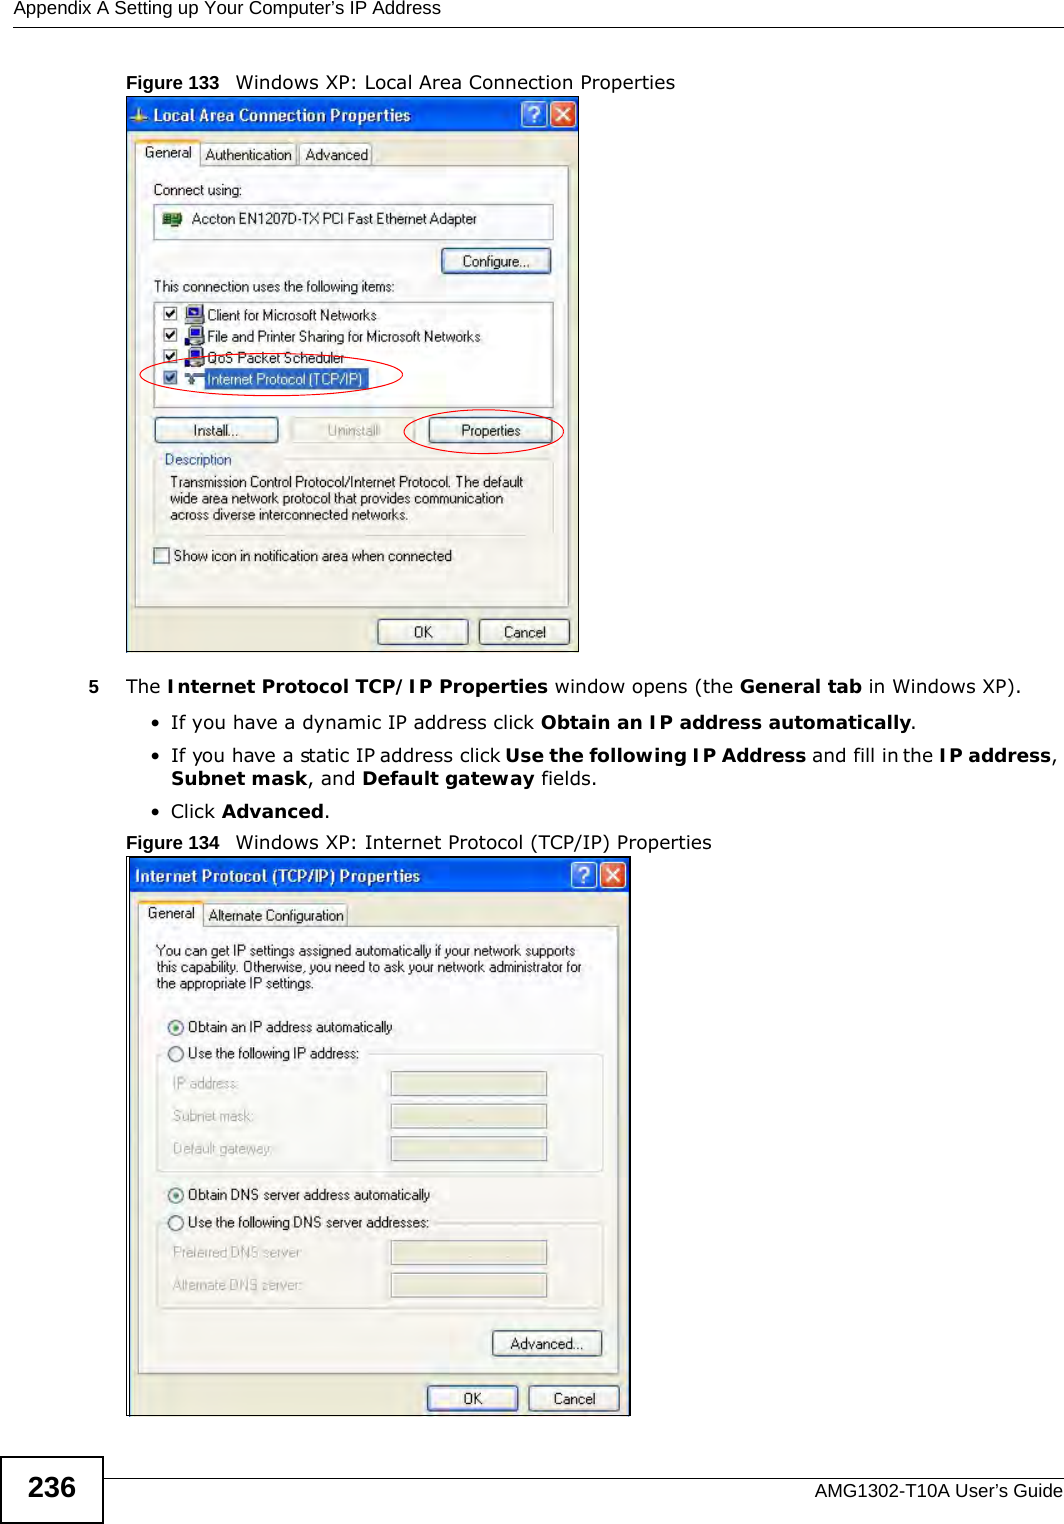 Appendix A Setting up Your Computer’s IP AddressAMG1302-T10A User’s Guide236Figure 133   Windows XP: Local Area Connection Properties5The Internet Protocol TCP/IP Properties window opens (the General tab in Windows XP).• If you have a dynamic IP address click Obtain an IP address automatically.• If you have a static IP address click Use the following IP Address and fill in the IP address, Subnet mask, and Default gateway fields. • Click Advanced.Figure 134   Windows XP: Internet Protocol (TCP/IP) Properties